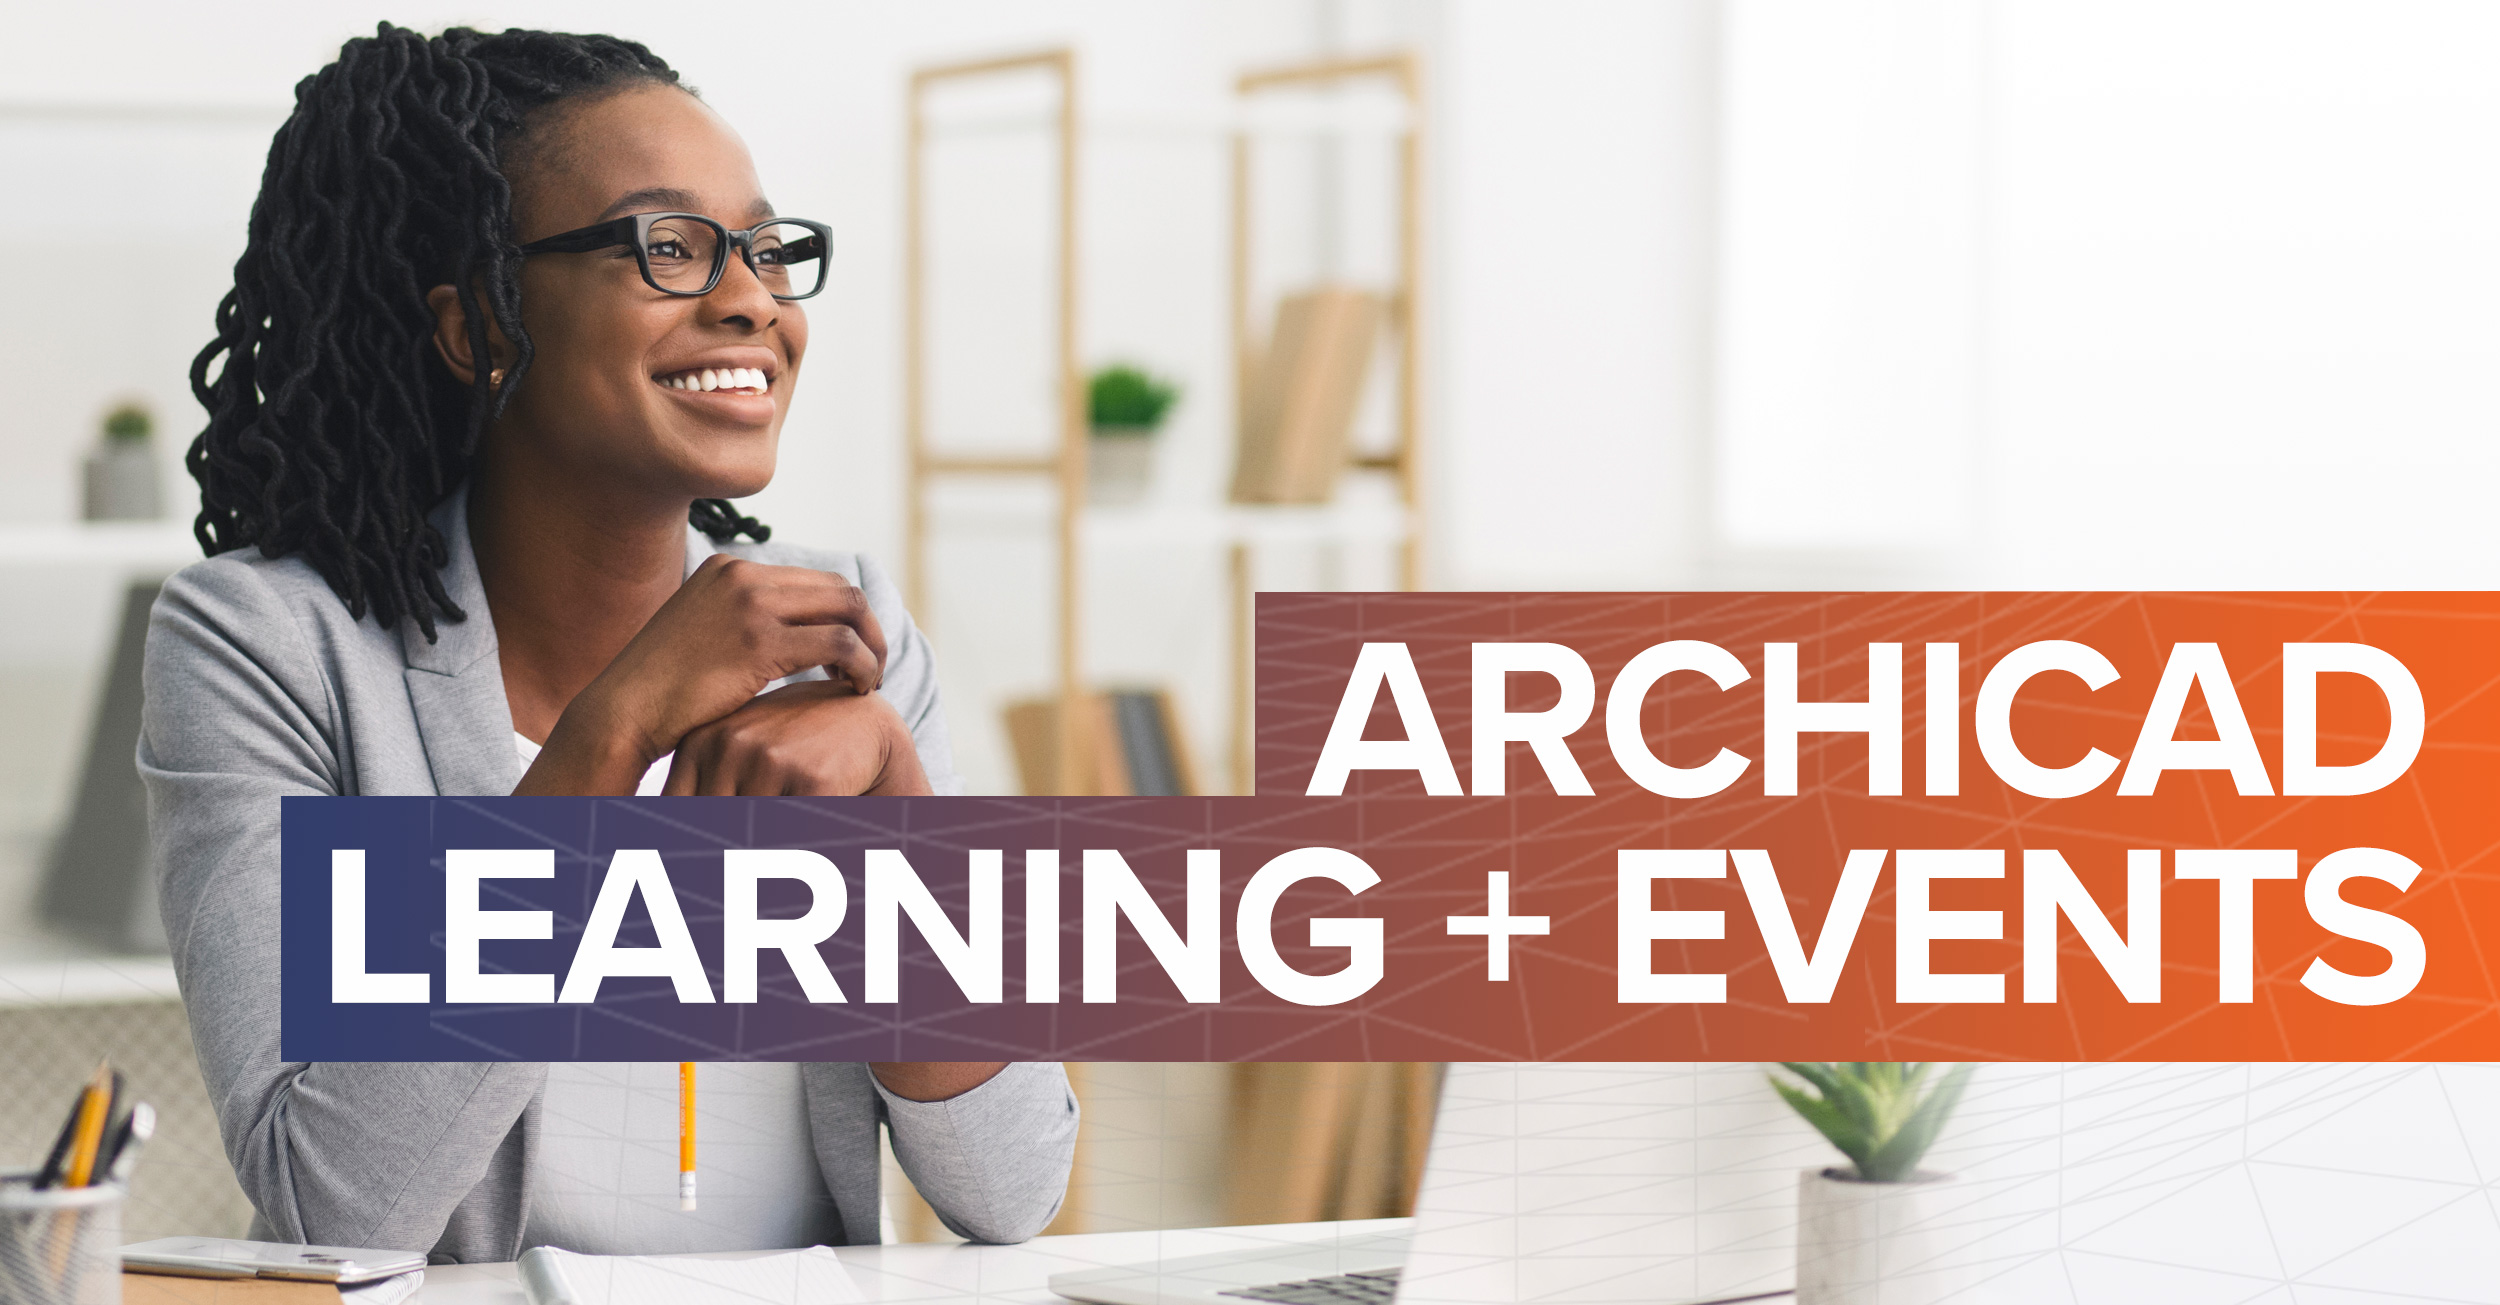 Archicad Learning Events